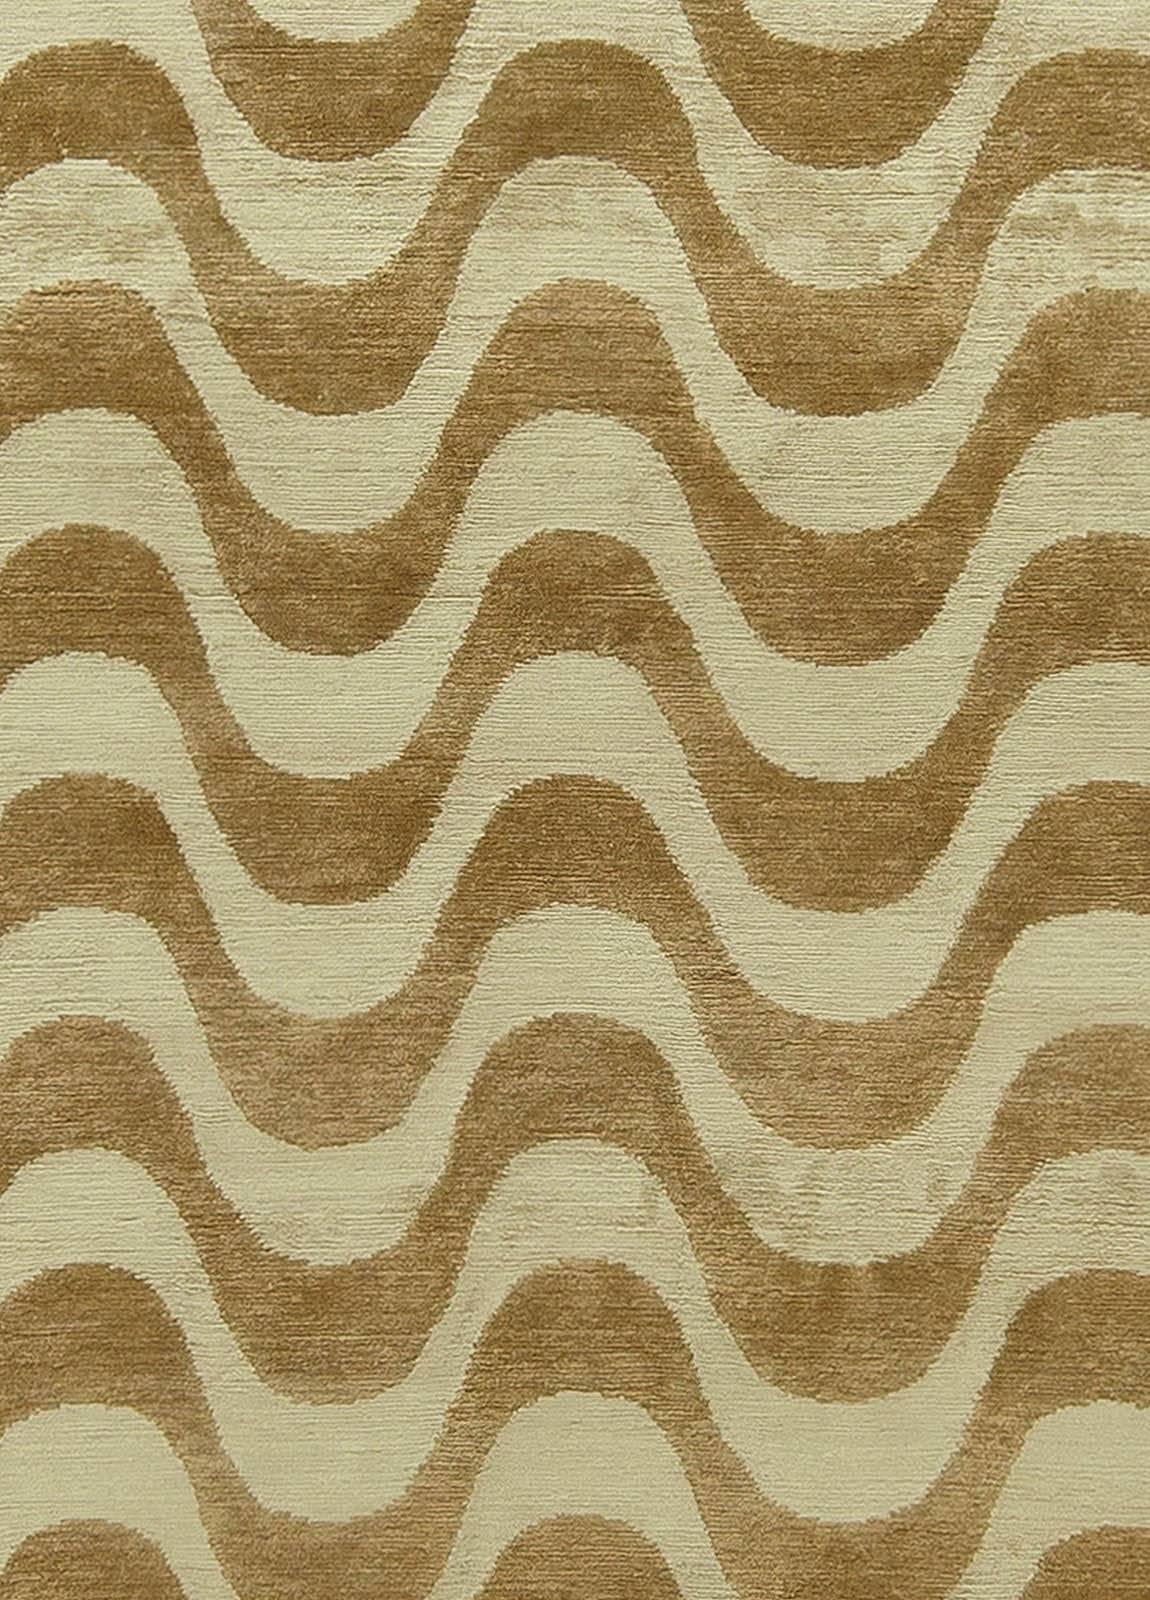 Contemporary gold waves design handmade wool and silk rug by Doris Leslie Blau.
Size: 9'0